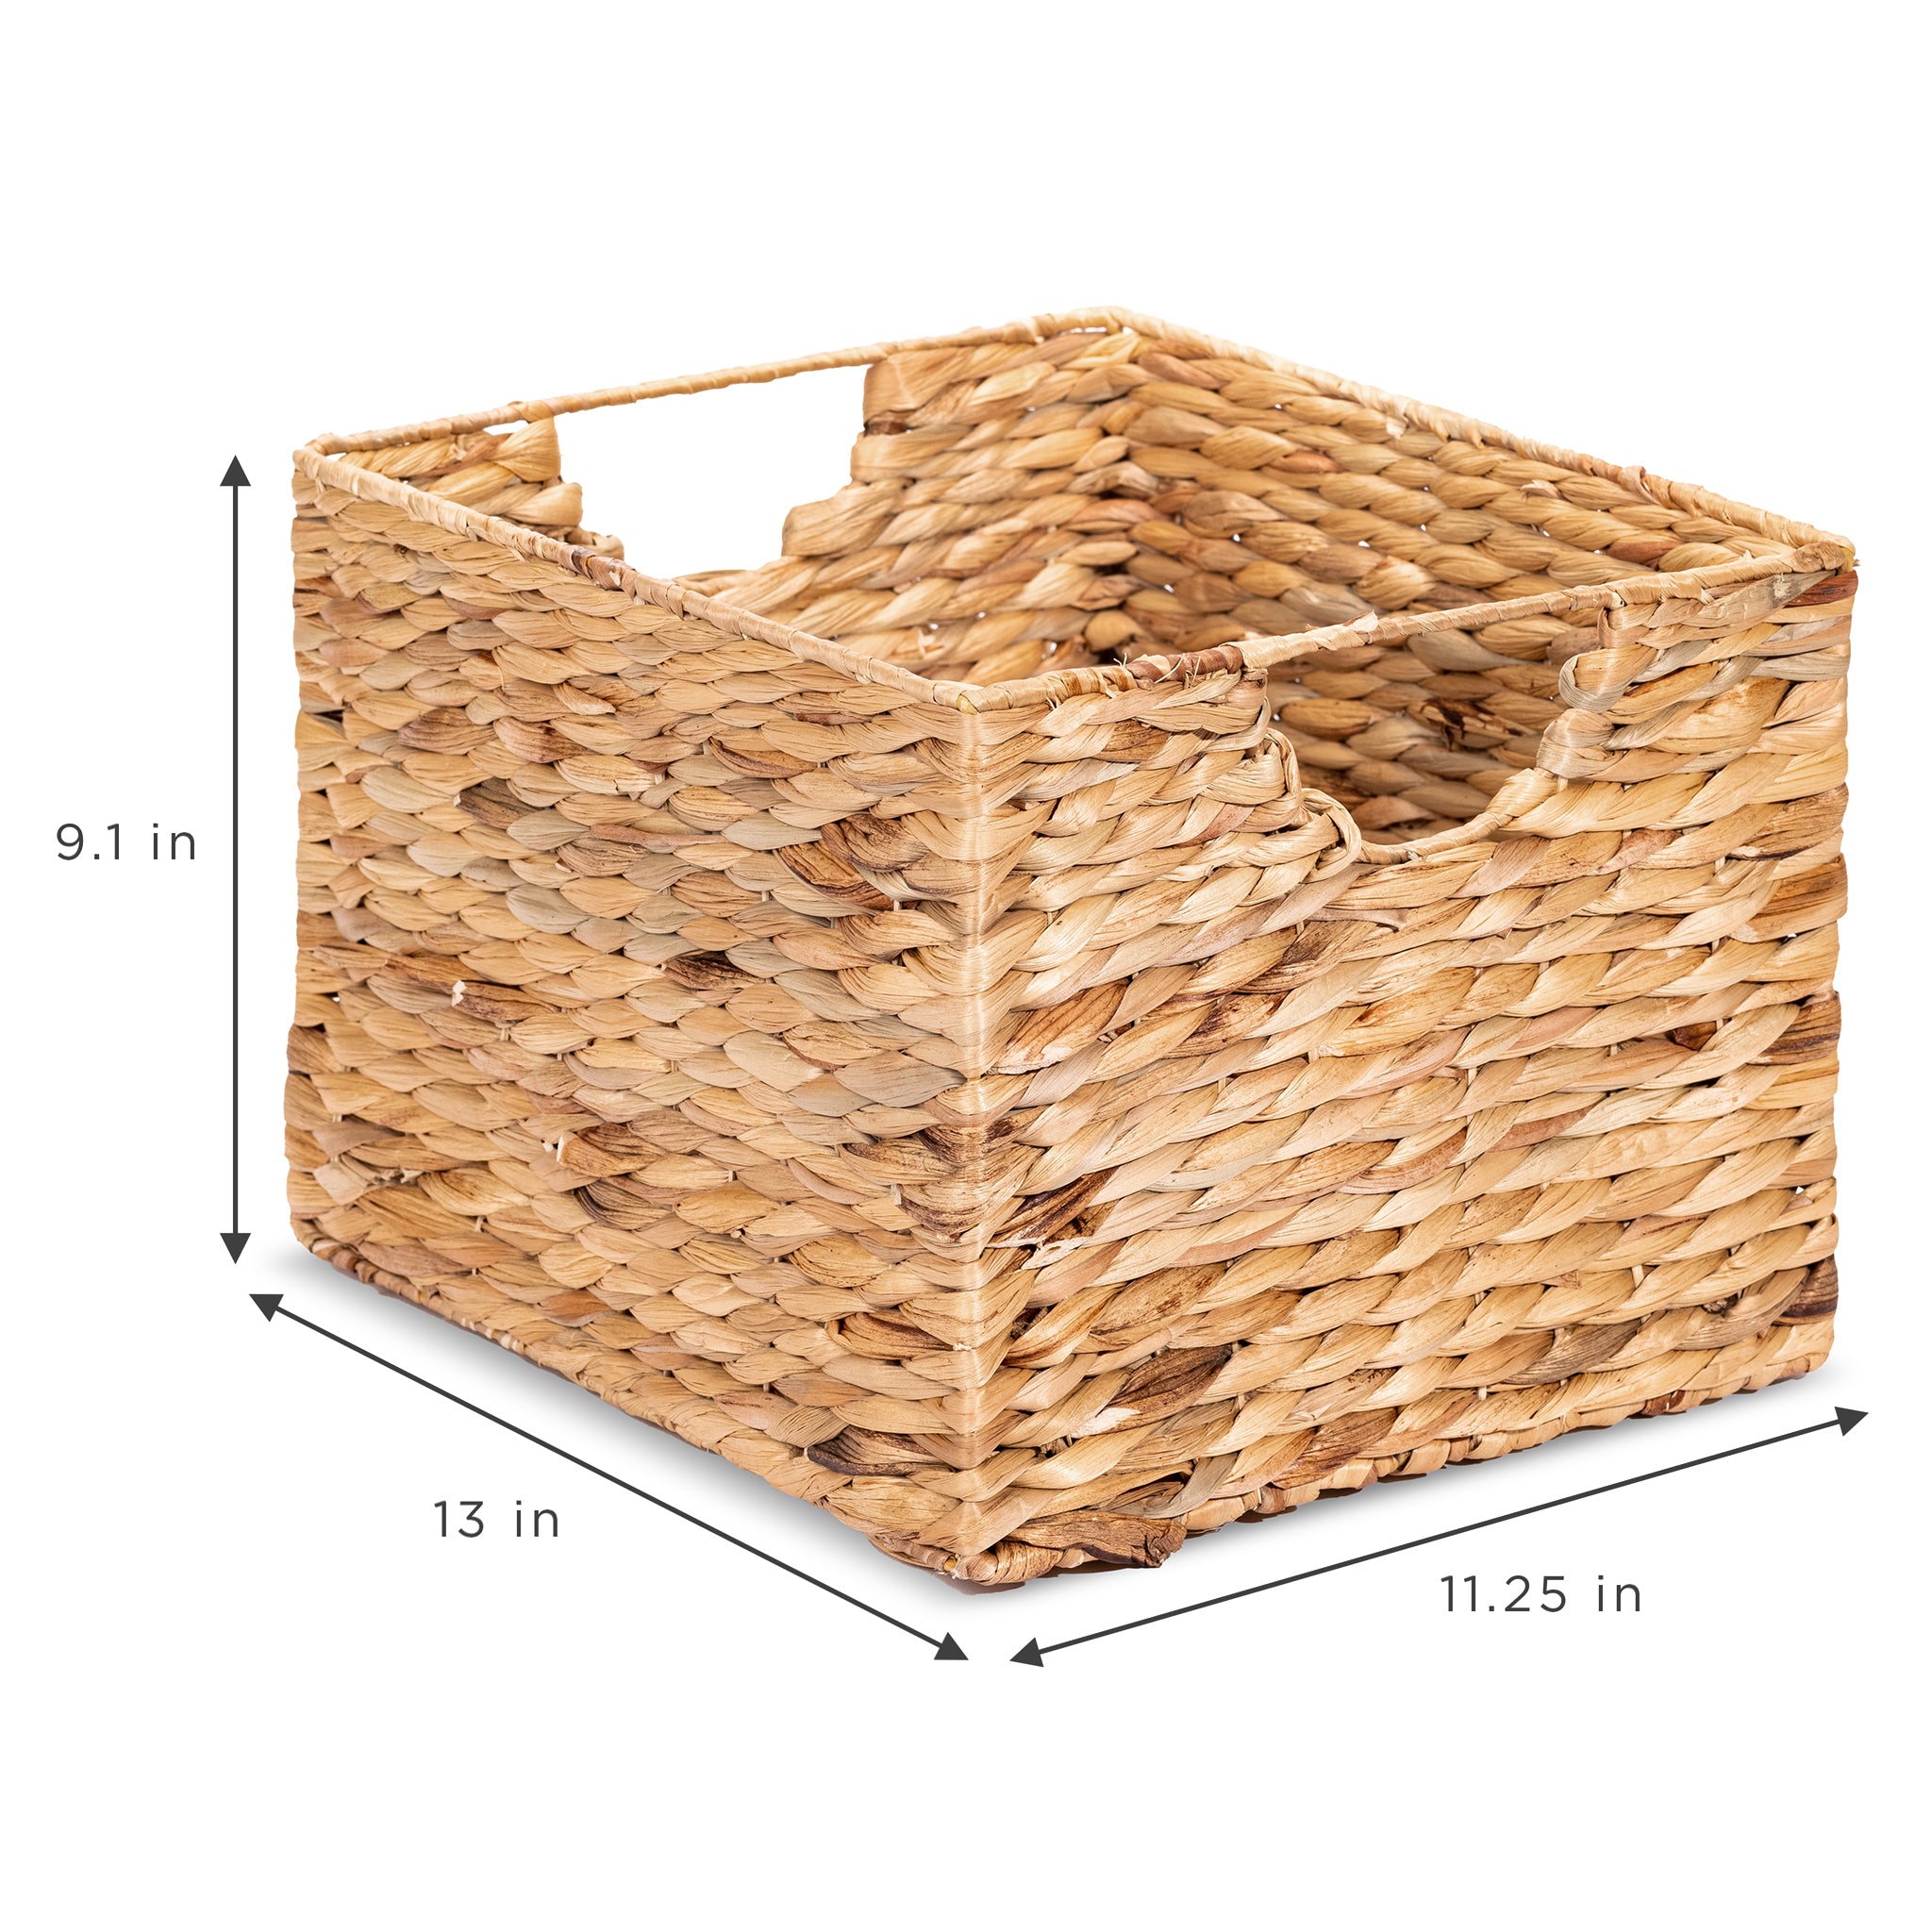 Seagrass Utility Baskets (3-Pack)